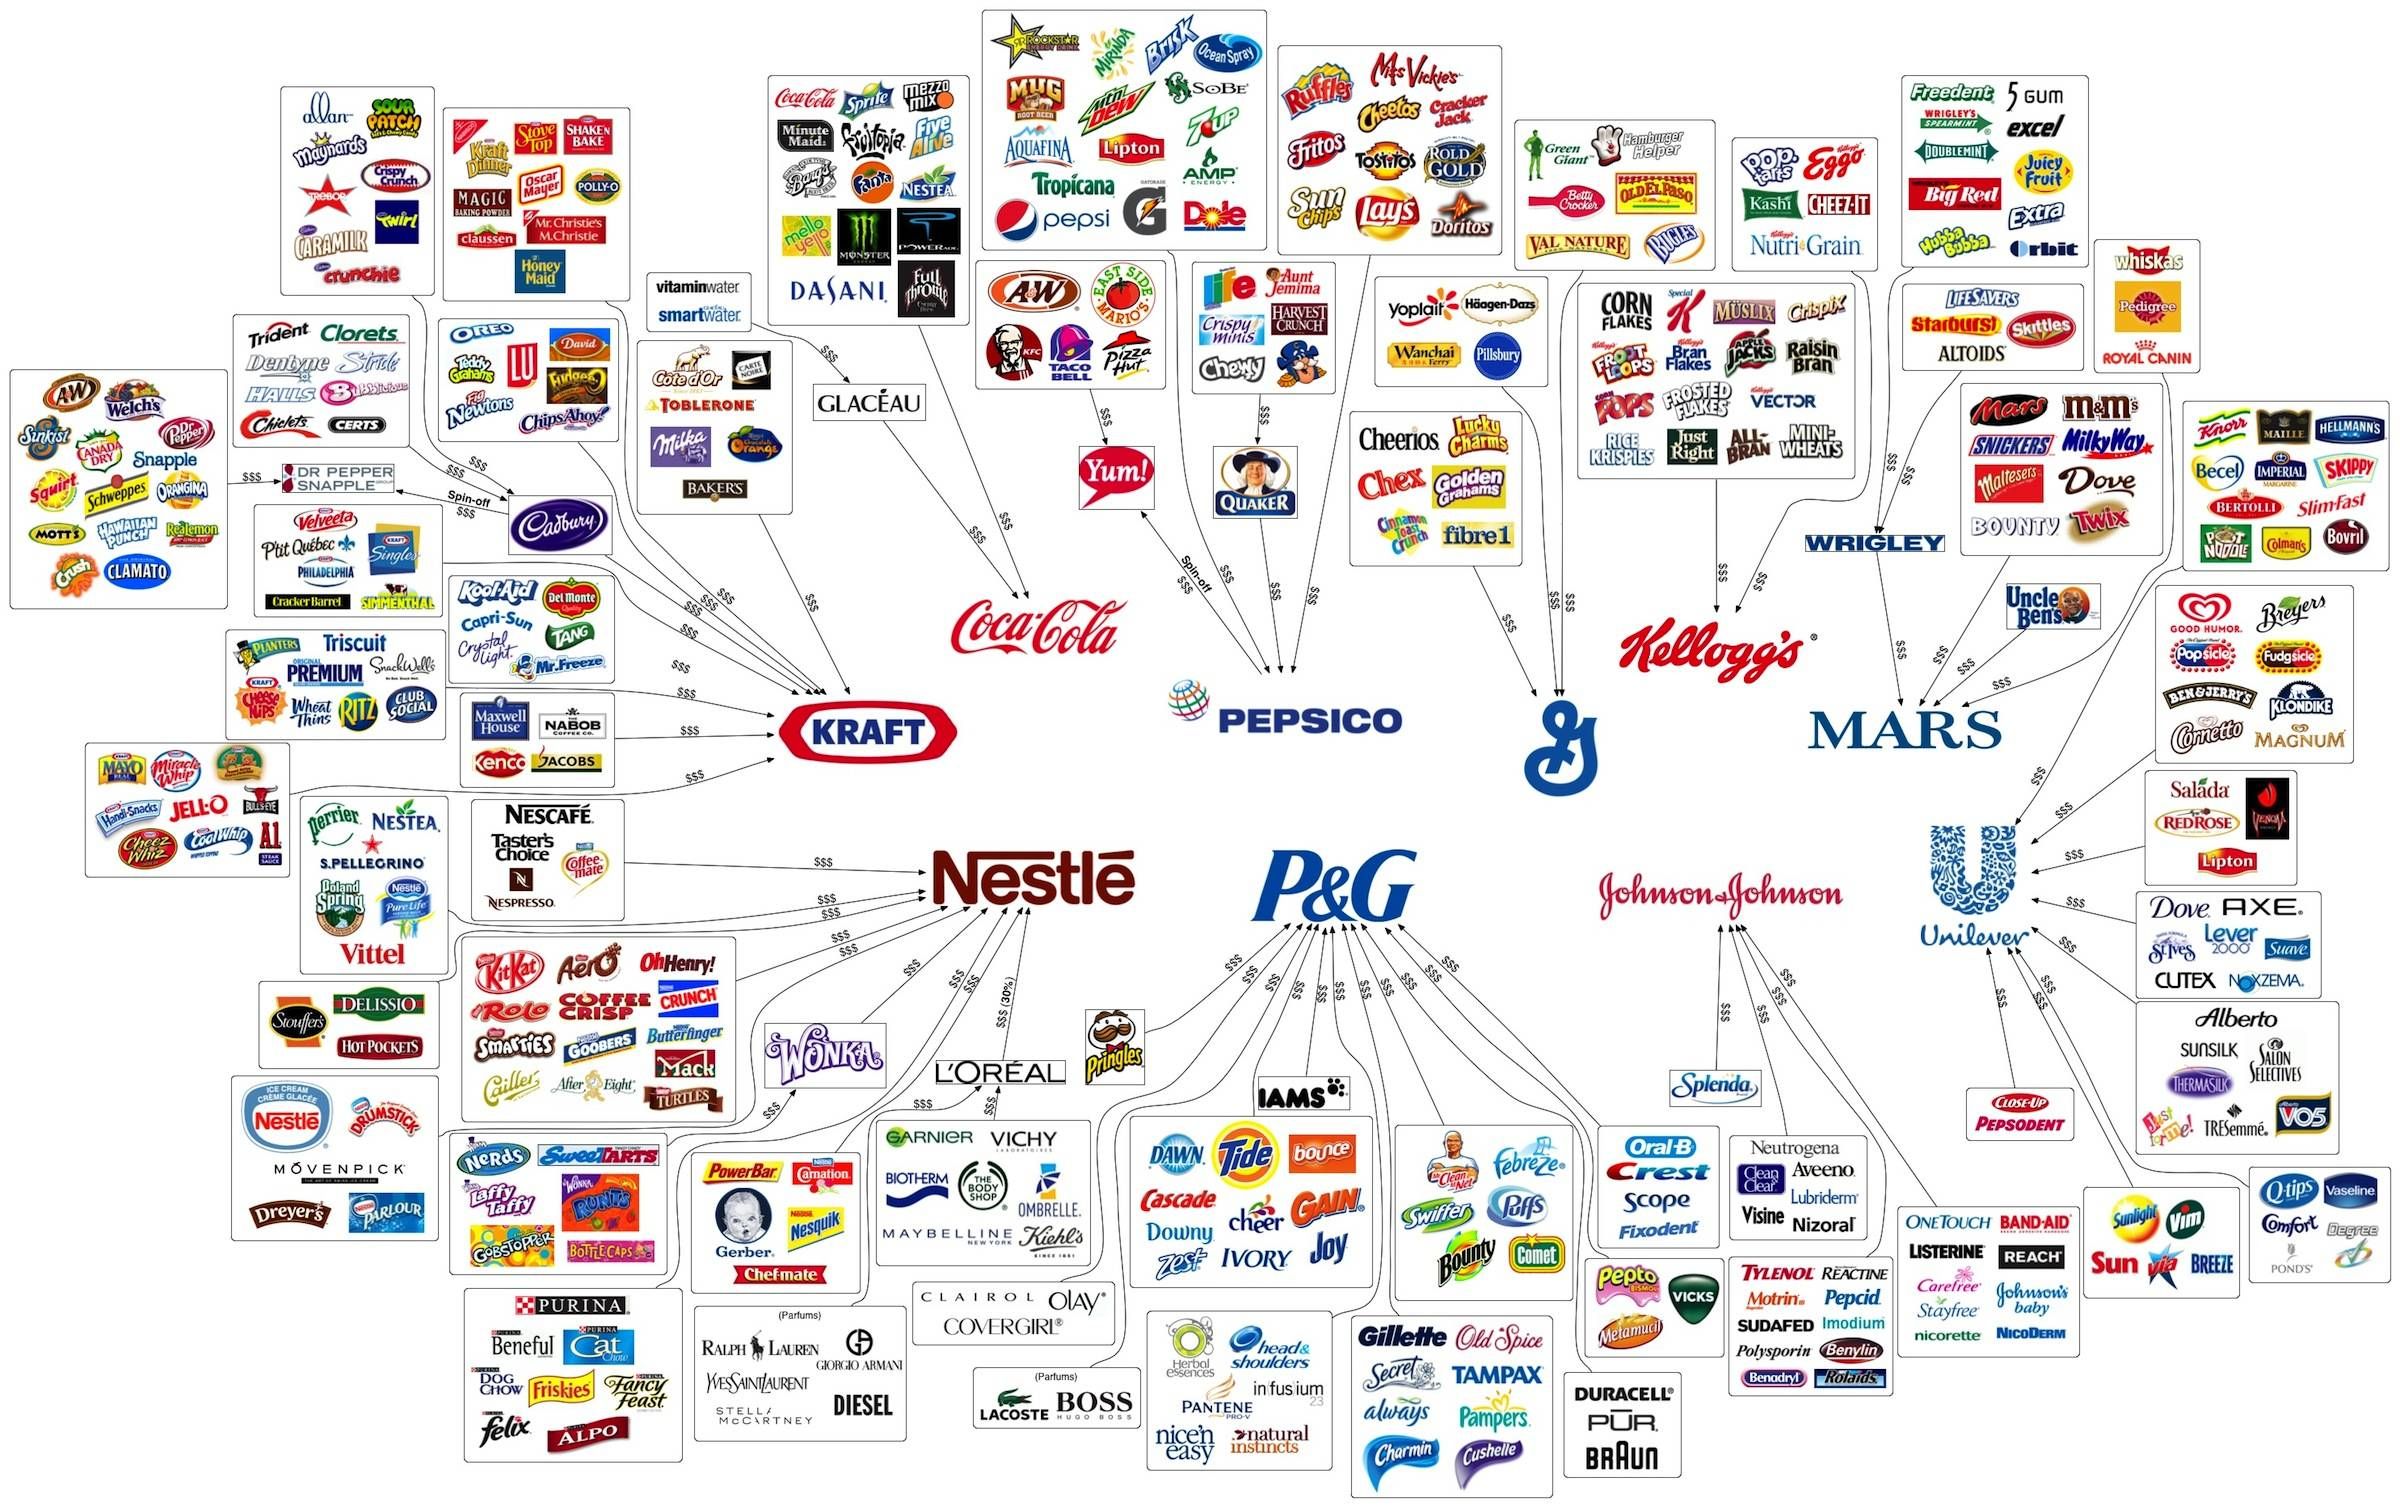 The illusion of choice